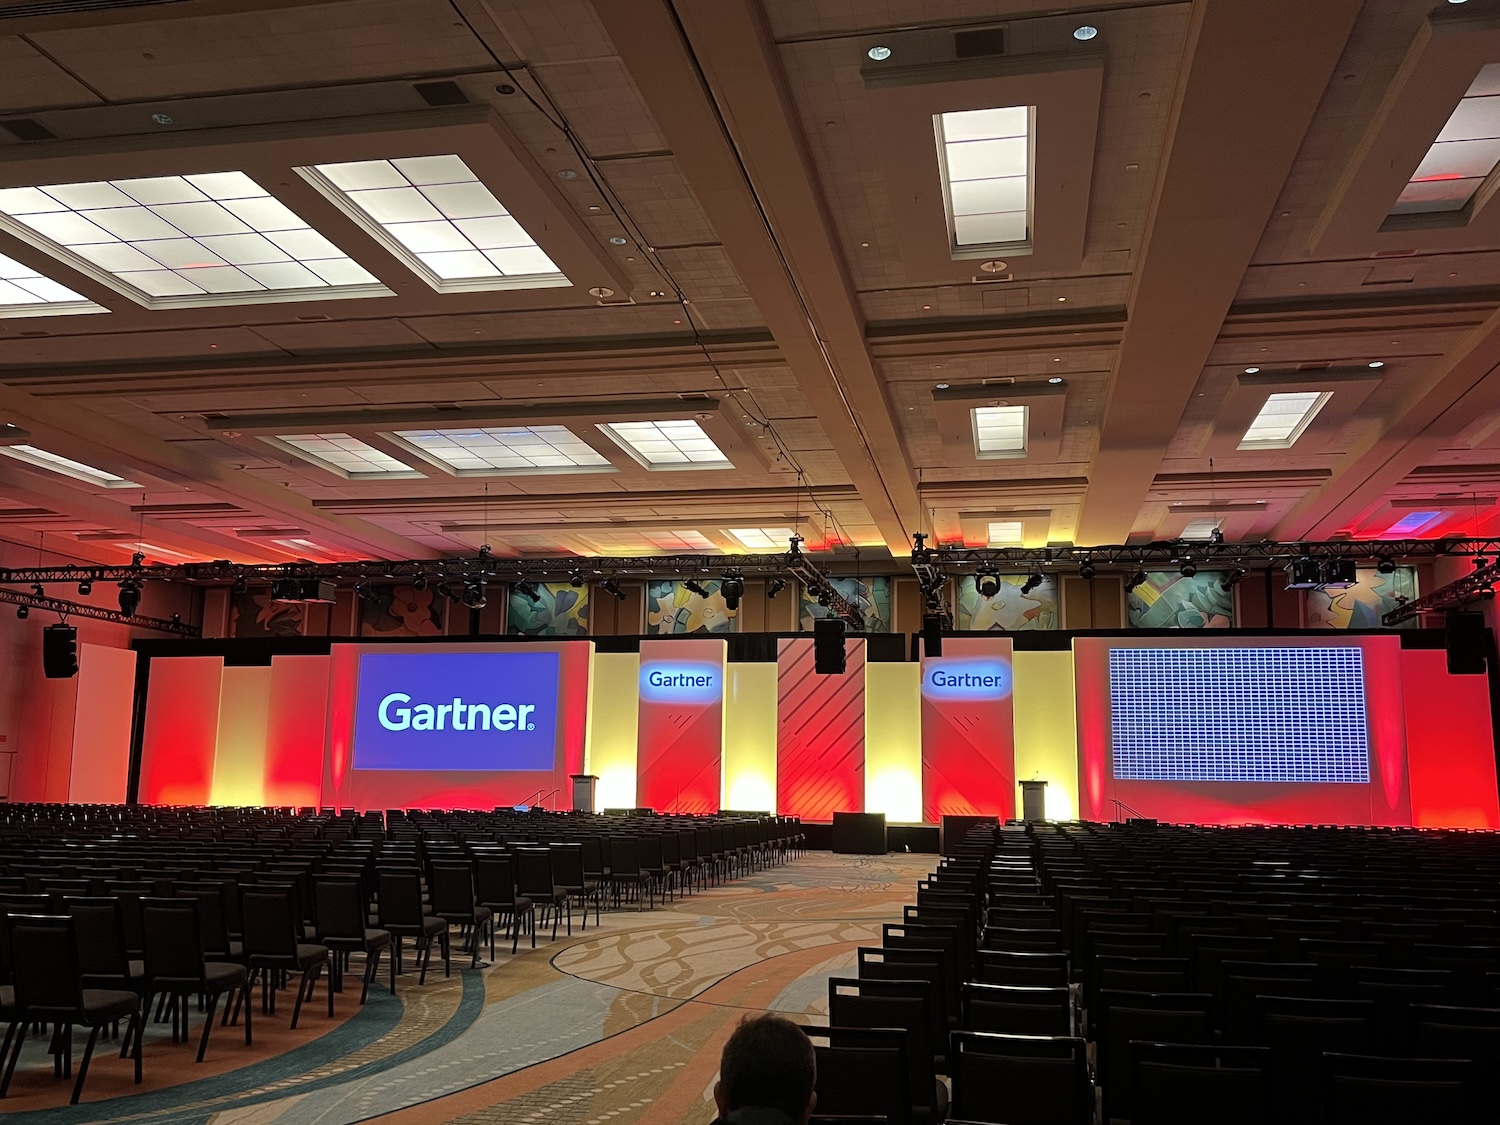 A spacious conference room with rows of chairs facing a stage, lit with red tones and featuring screens with 'Gartner' logos.